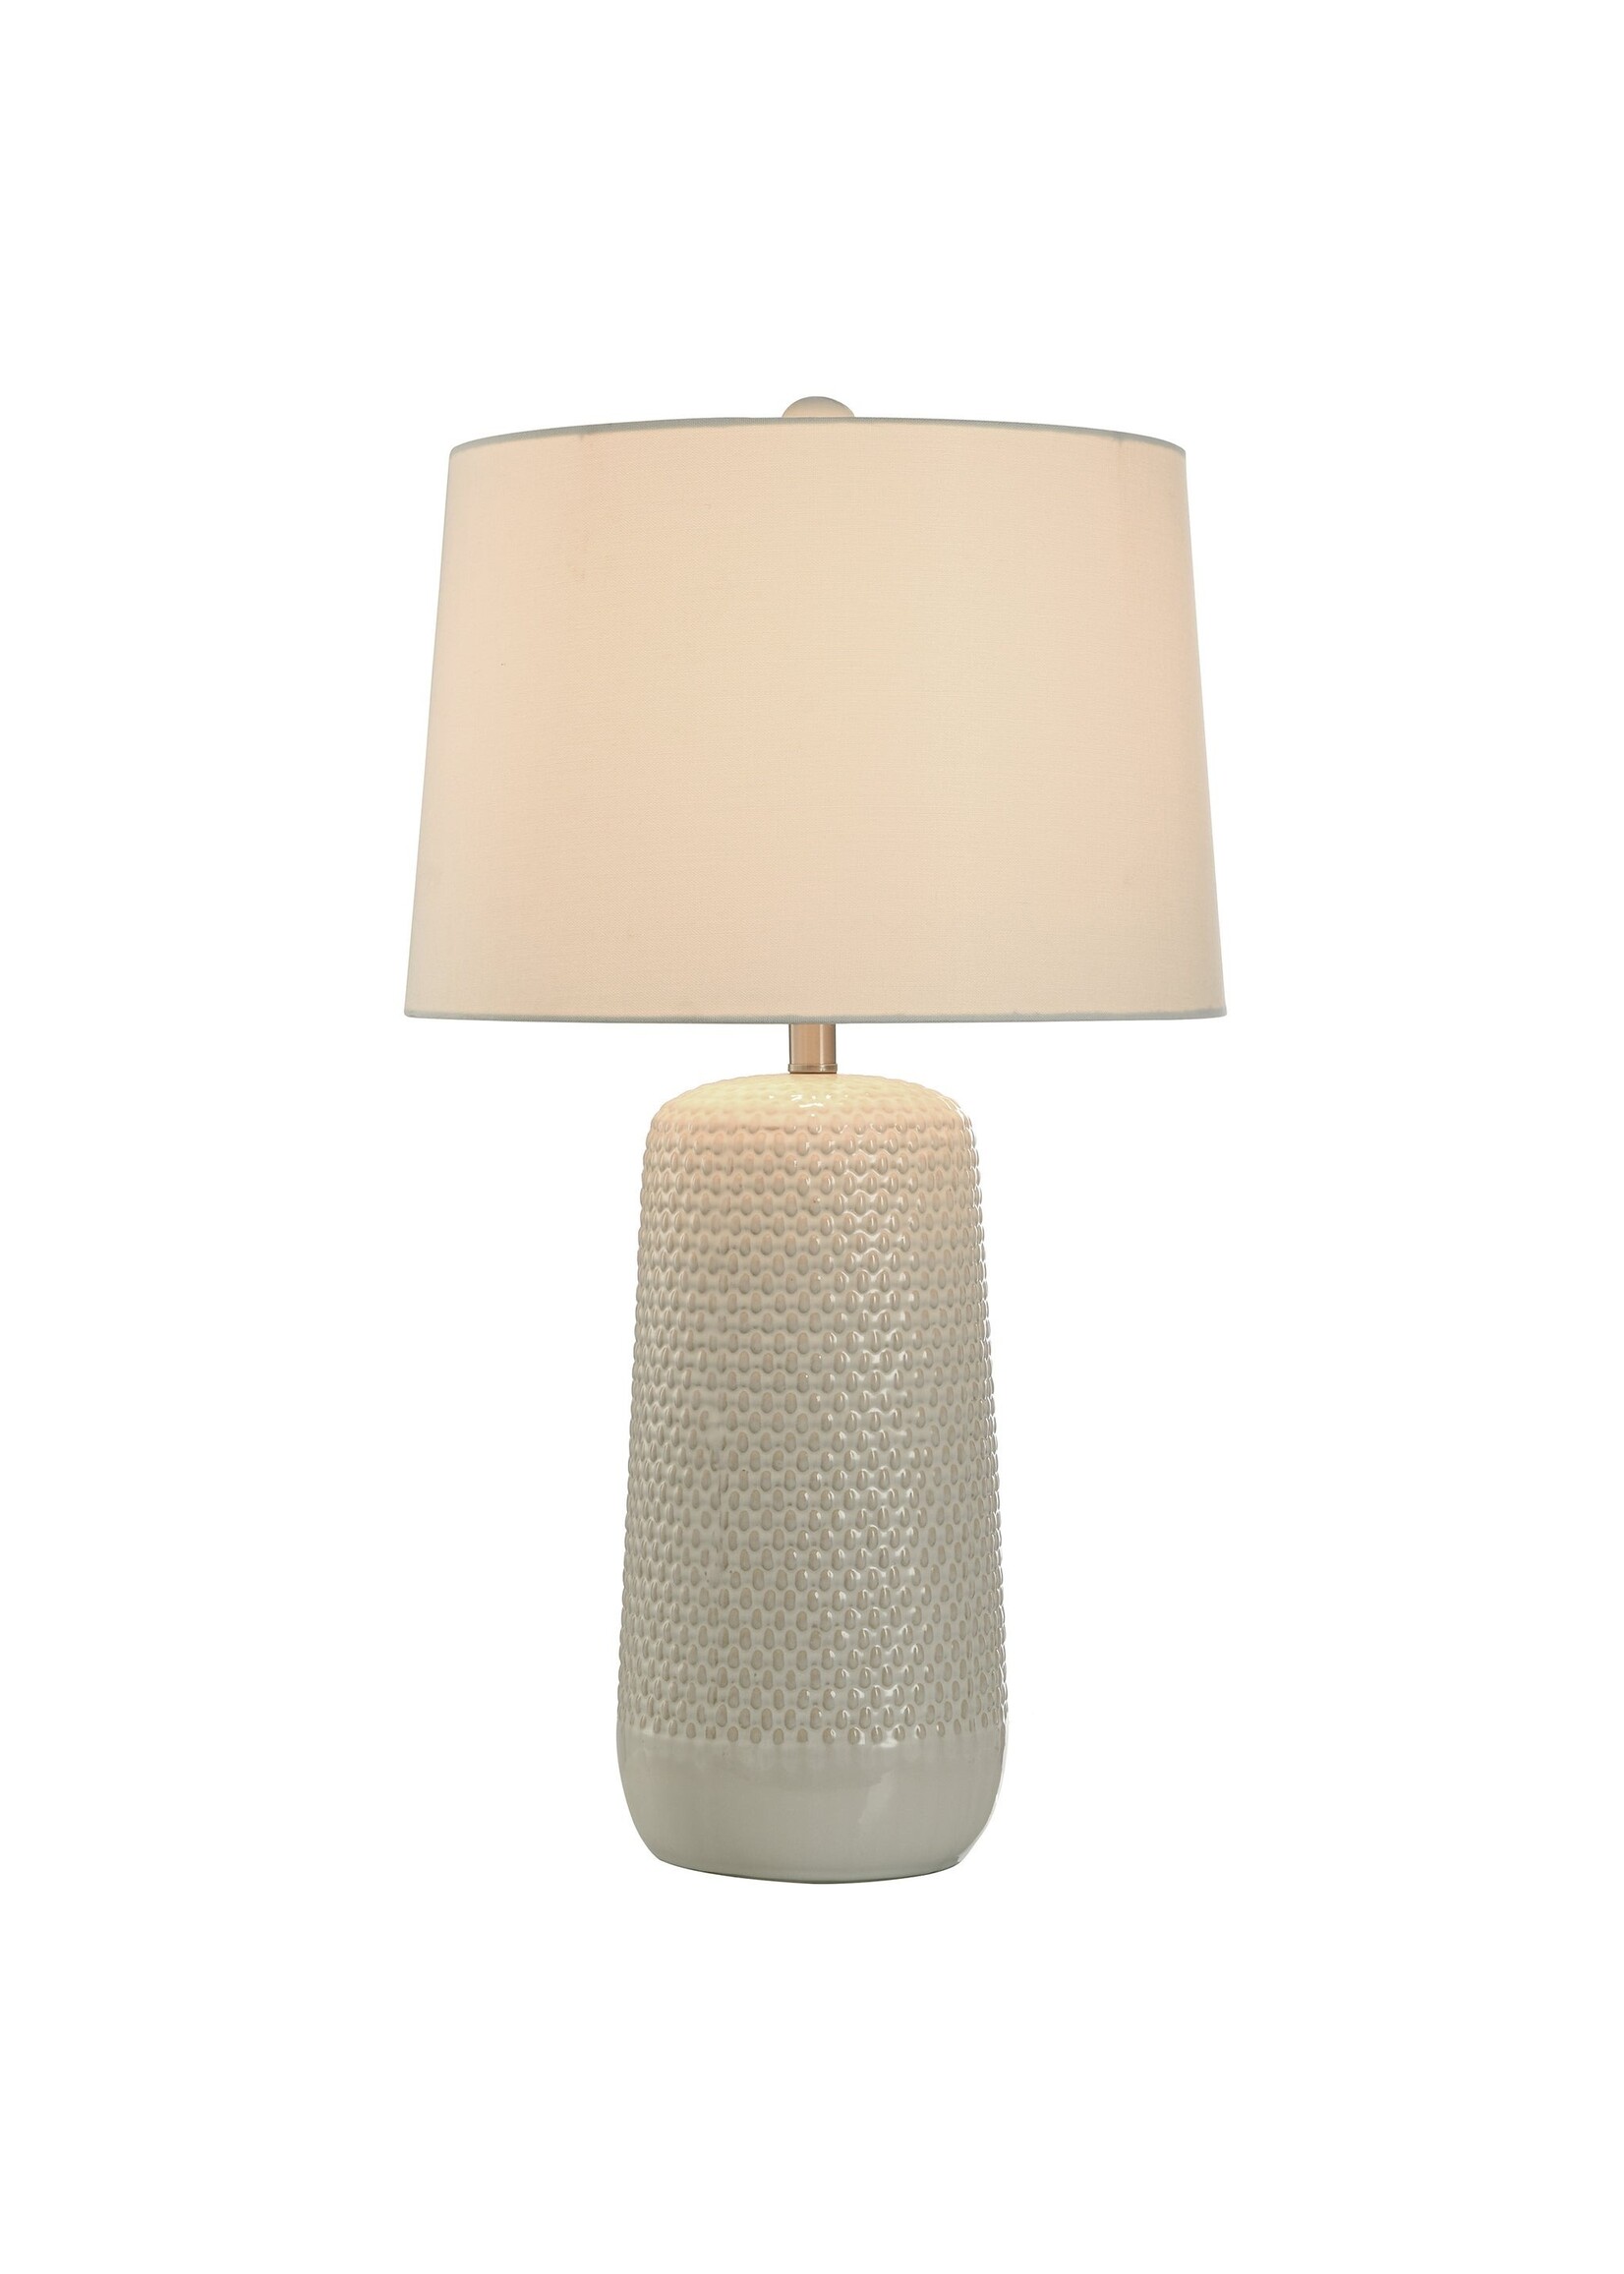 Style Craft 30in Subtle Ceramic Body with Woven Wicker Textured Design Table Lamp L318125